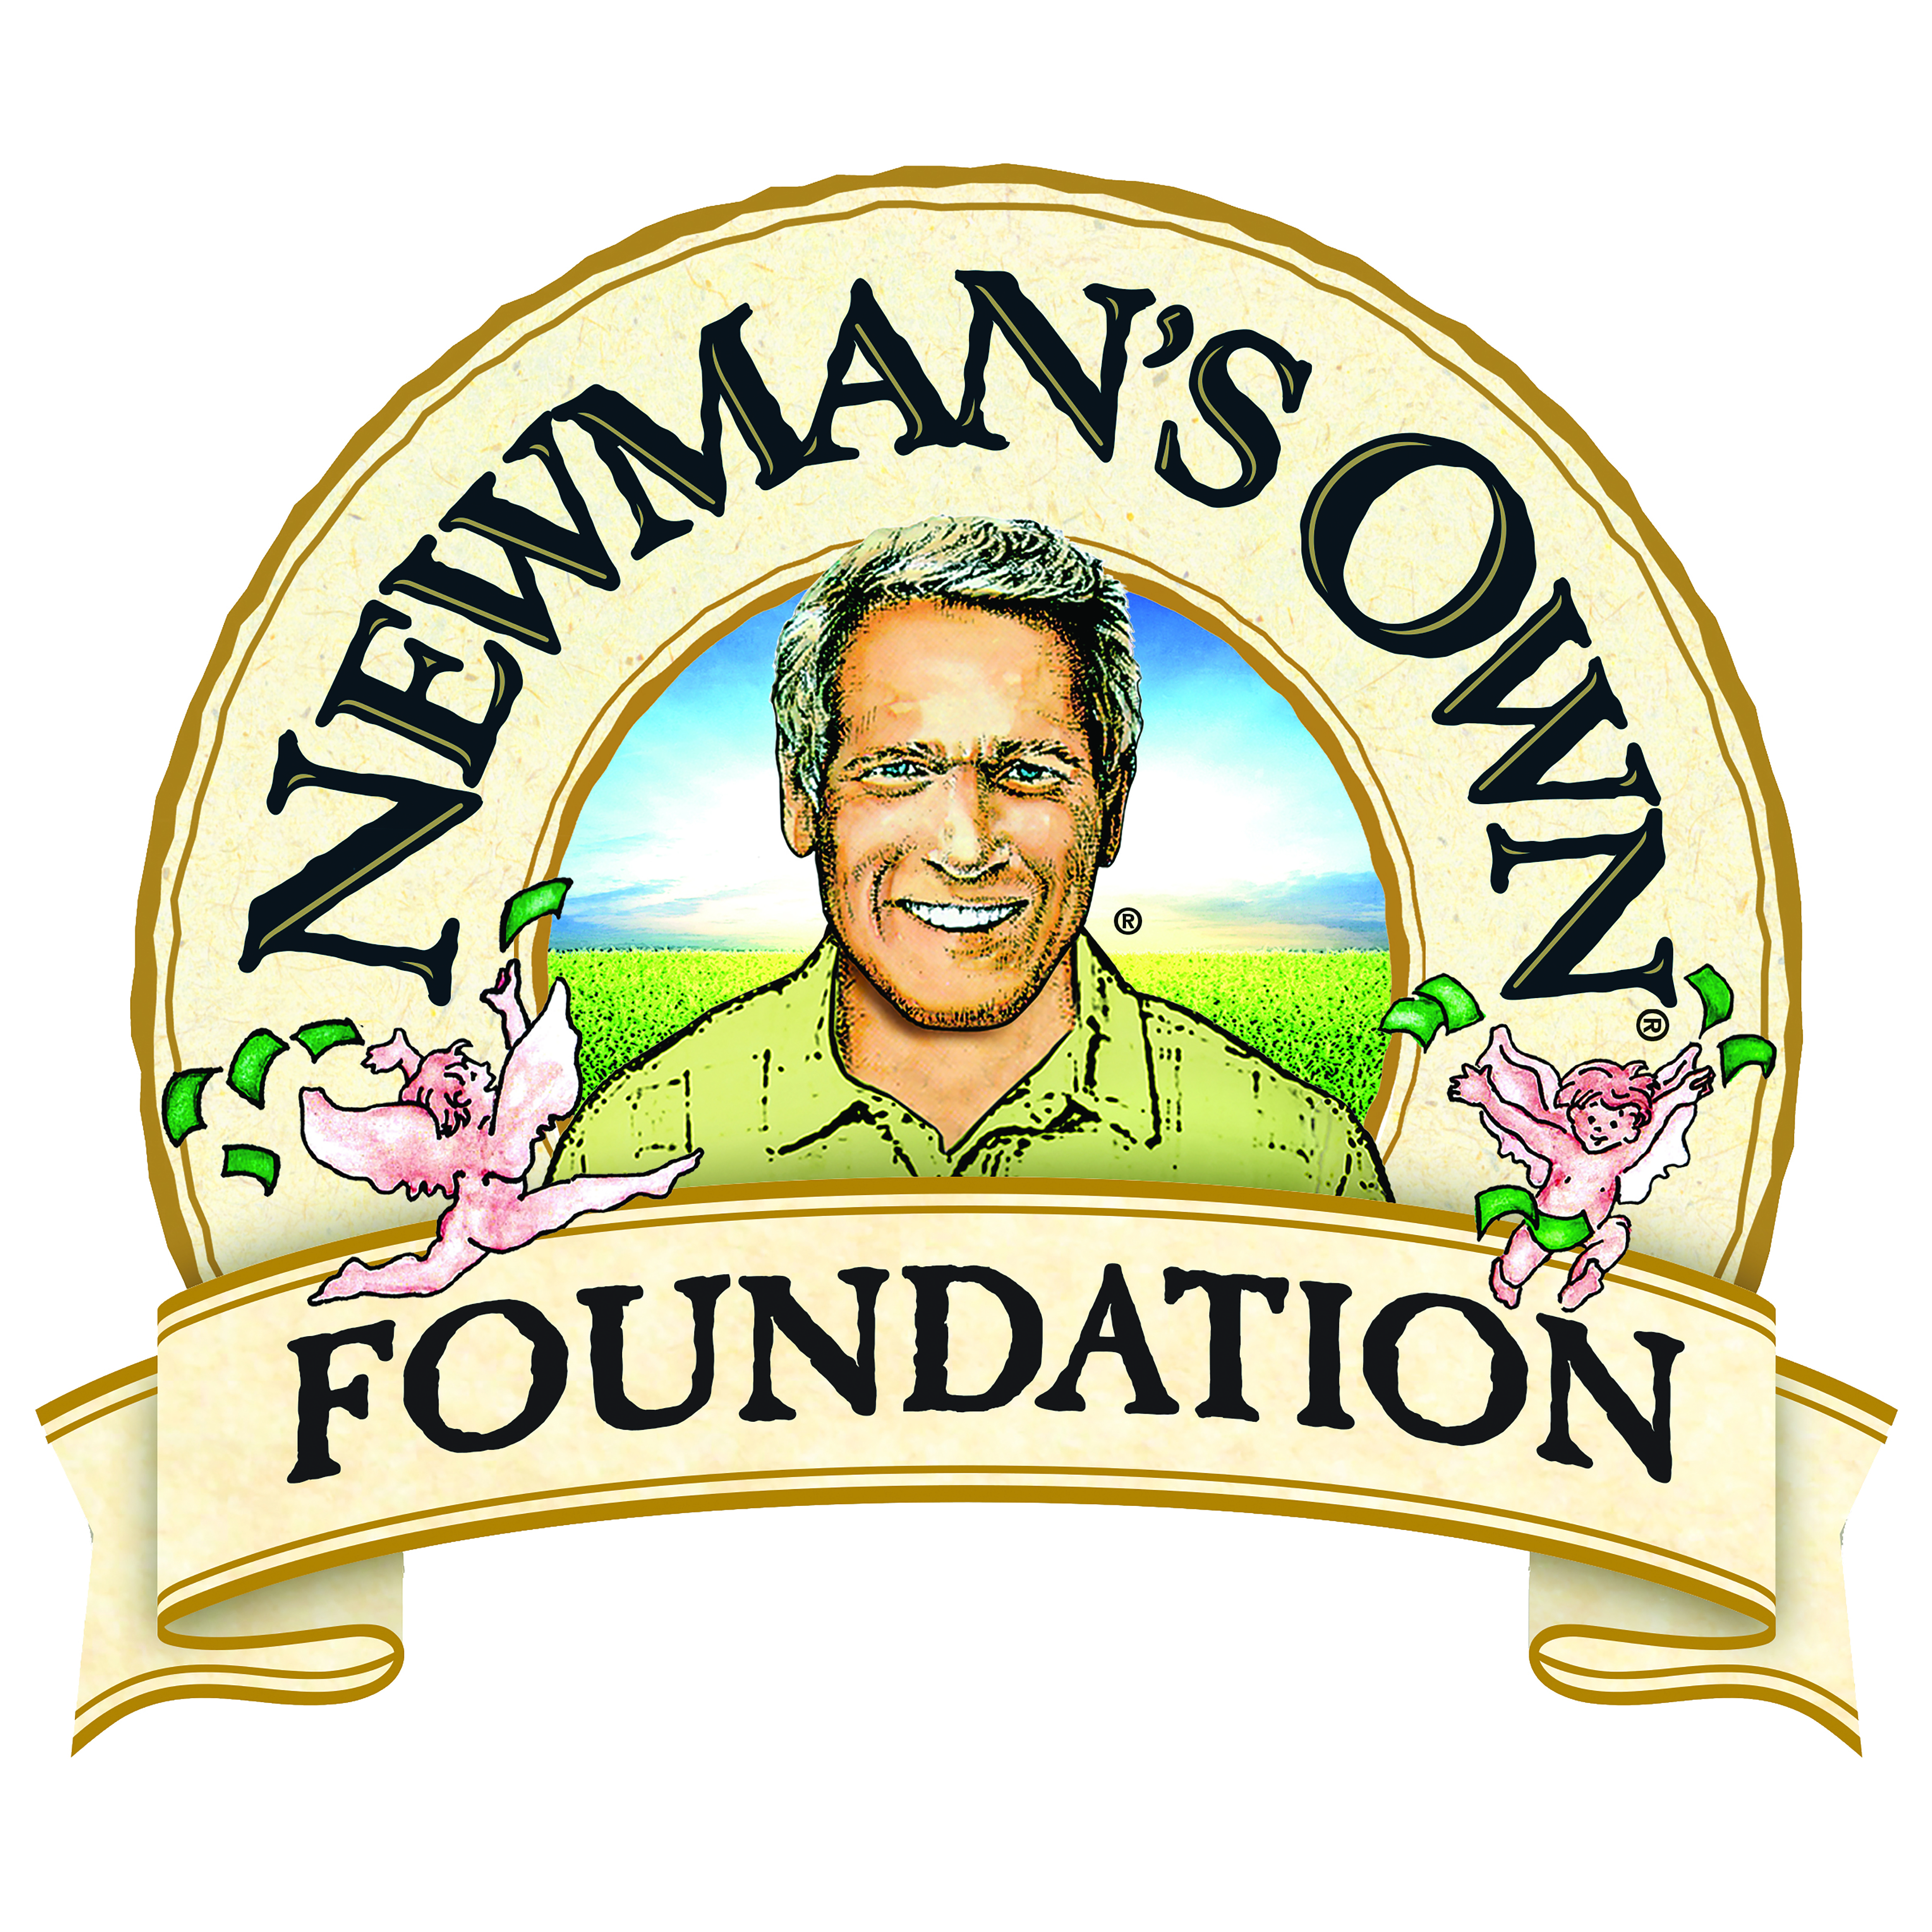 Newman's Own Foundation award a grant to Women in Philanthropy and Leadership at CCU.